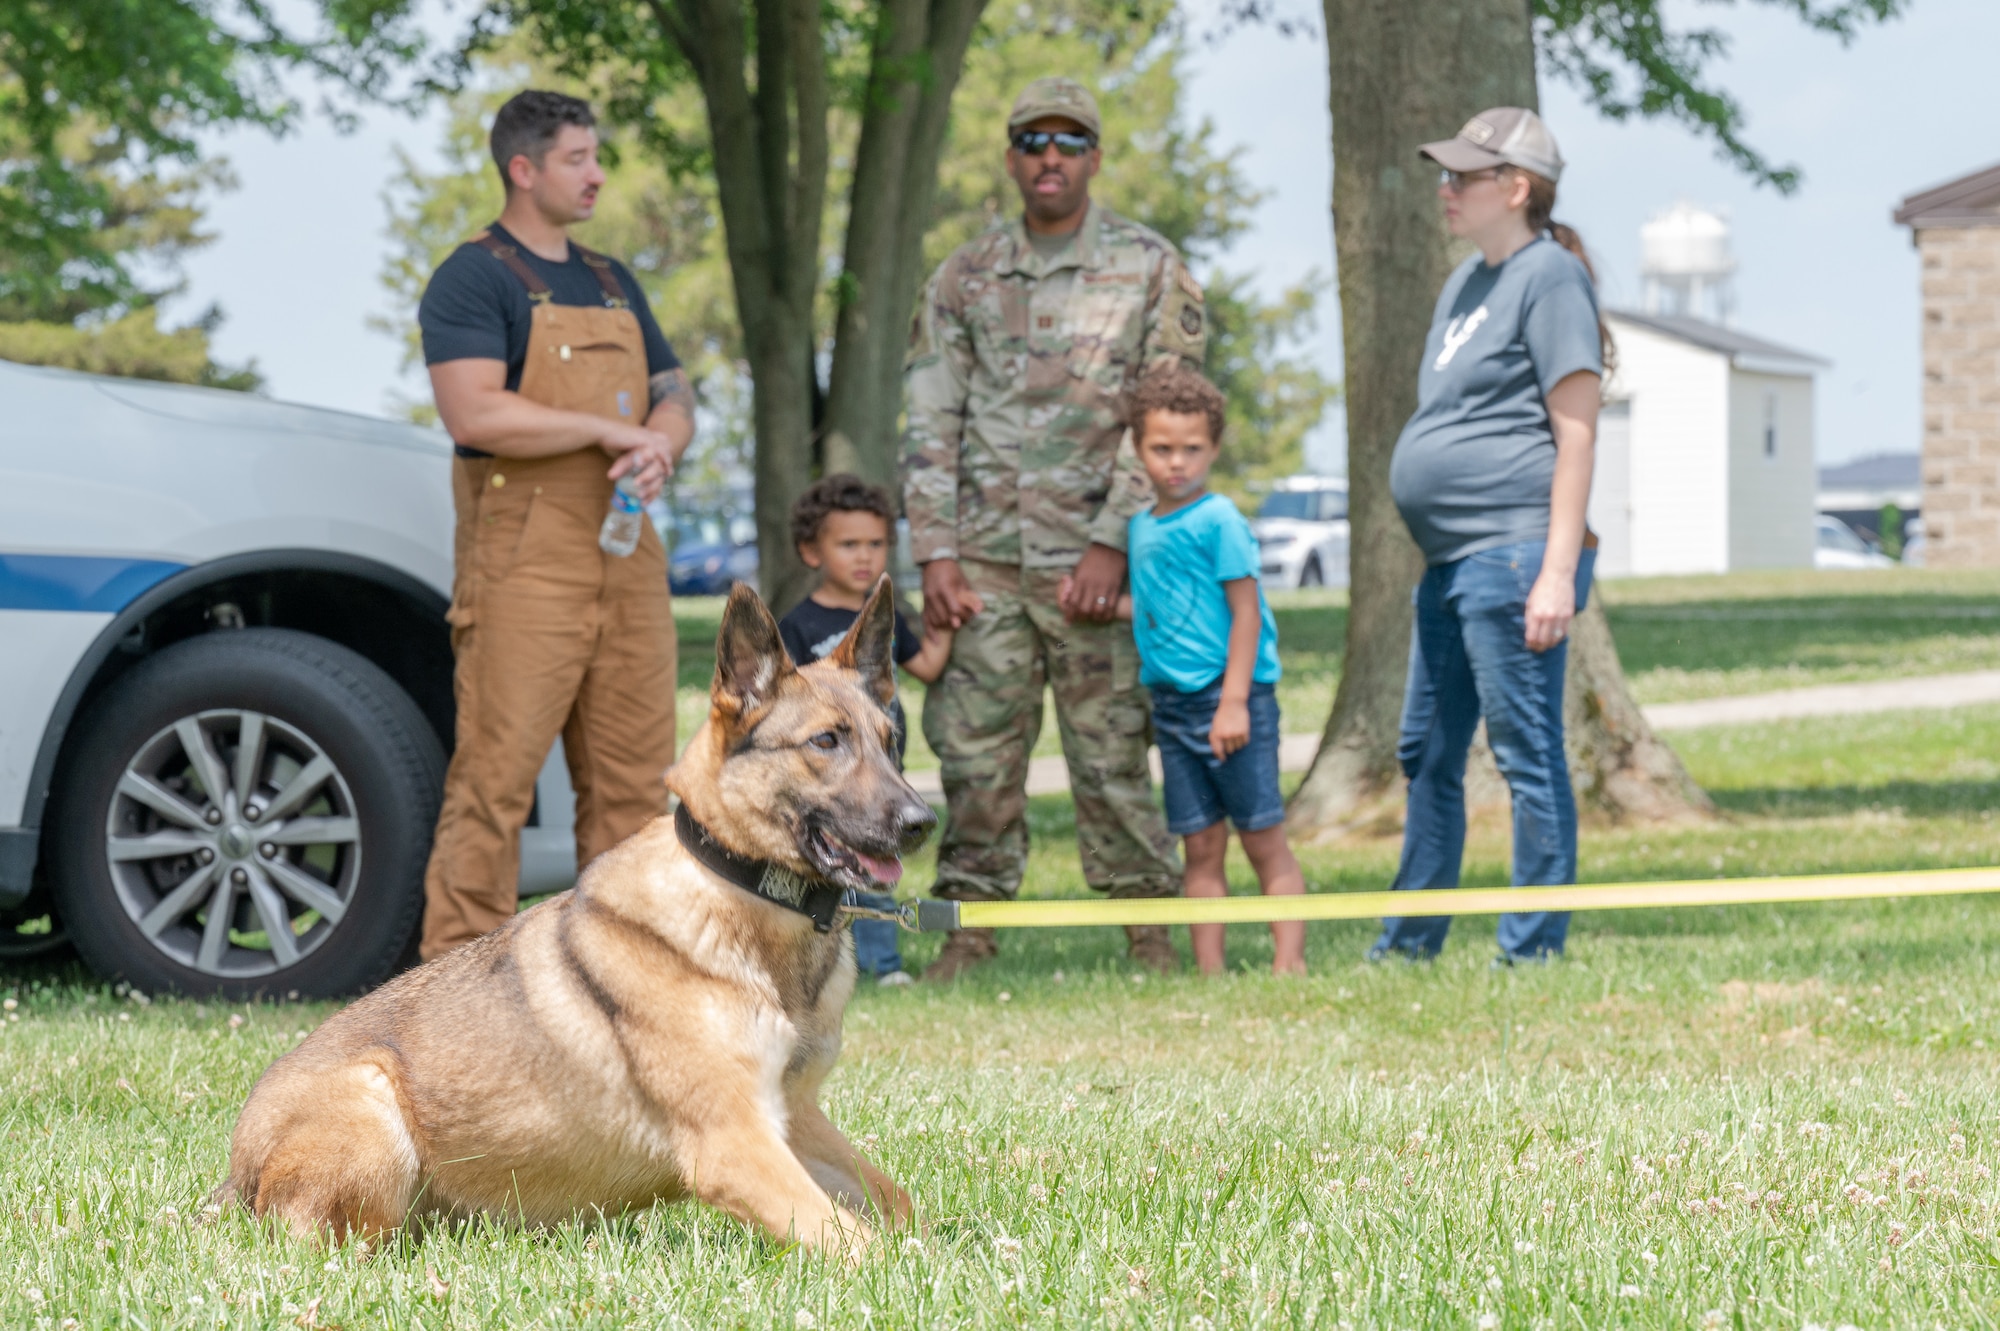 Participants of the 2022 Children’s Day Celebration observe military working dog training at Dover Air Force Base, Delaware, June 13, 2022. This year’s celebration offered outdoor activities and a mock deployment line to Team Dover families. (U.S. Air Force photo by Mauricio Campino)